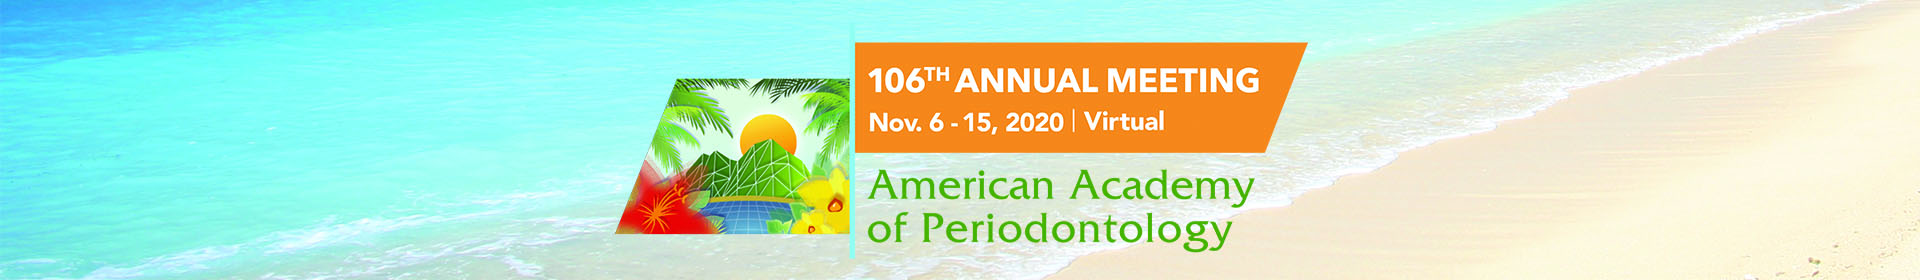 106th Annual Meeting Event Banner